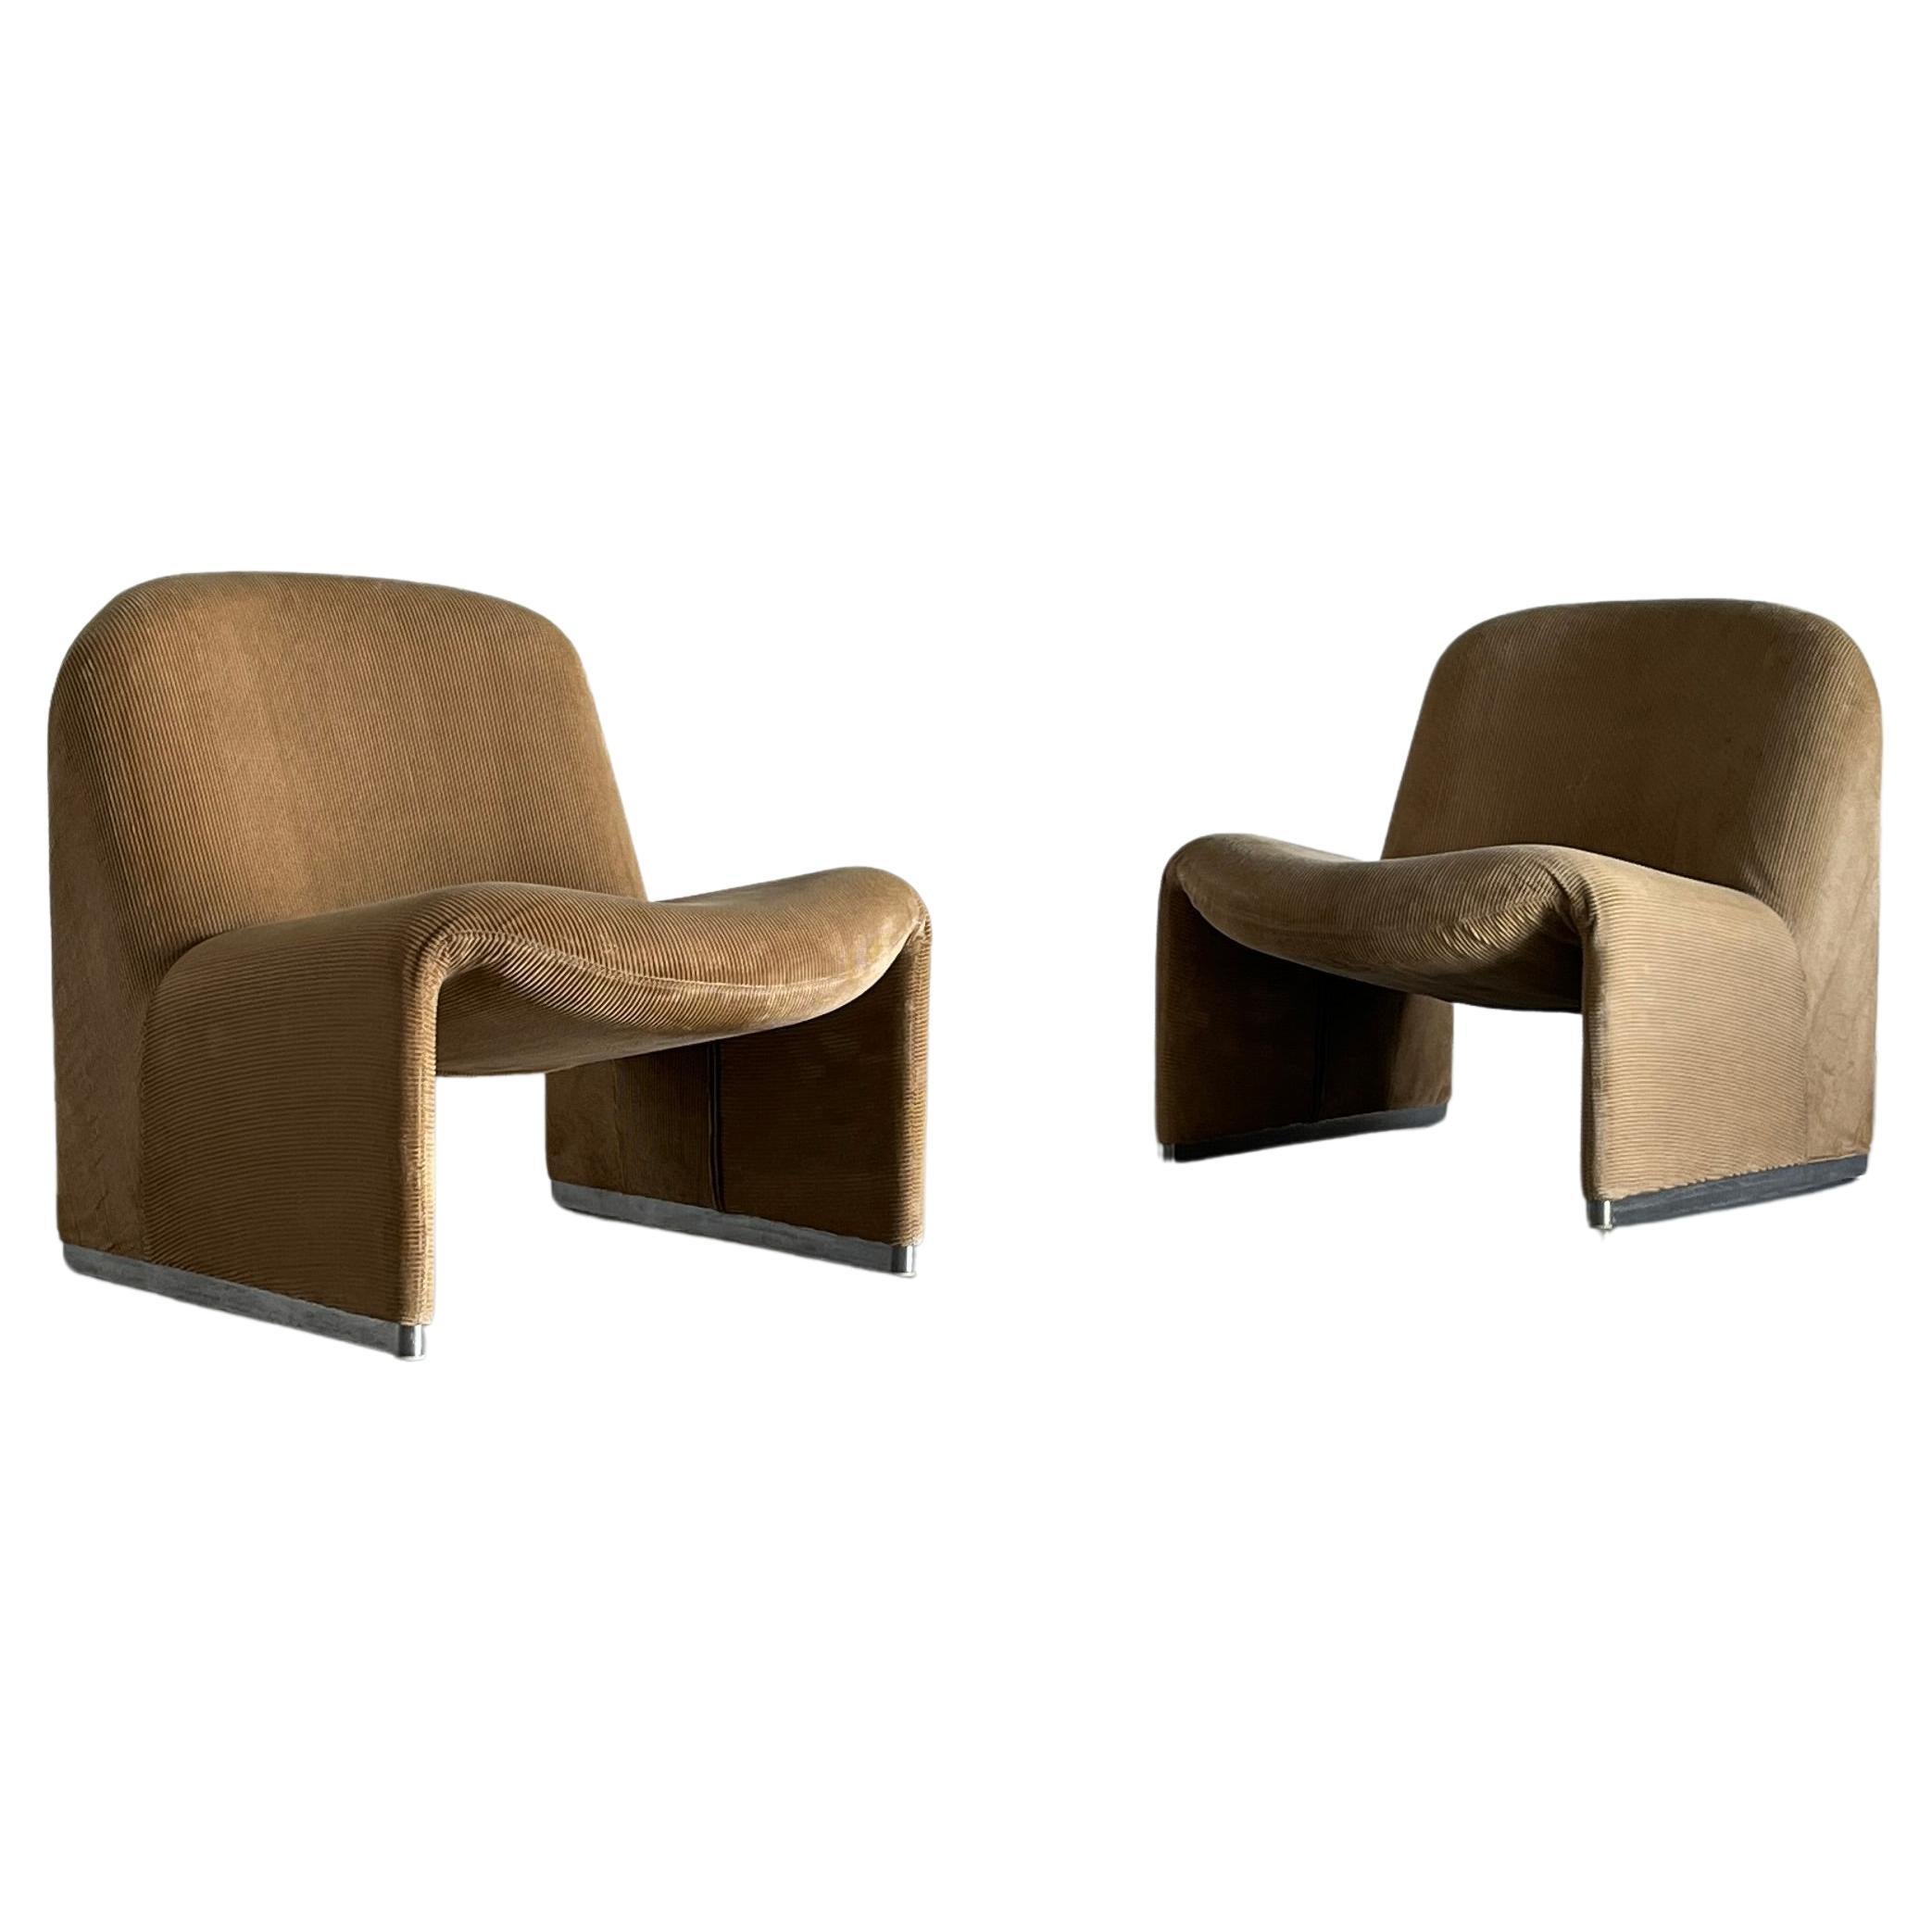 Pair of Alky Chairs in Beige Corduroy by Giancarlo Piretti for Anonima Castelli